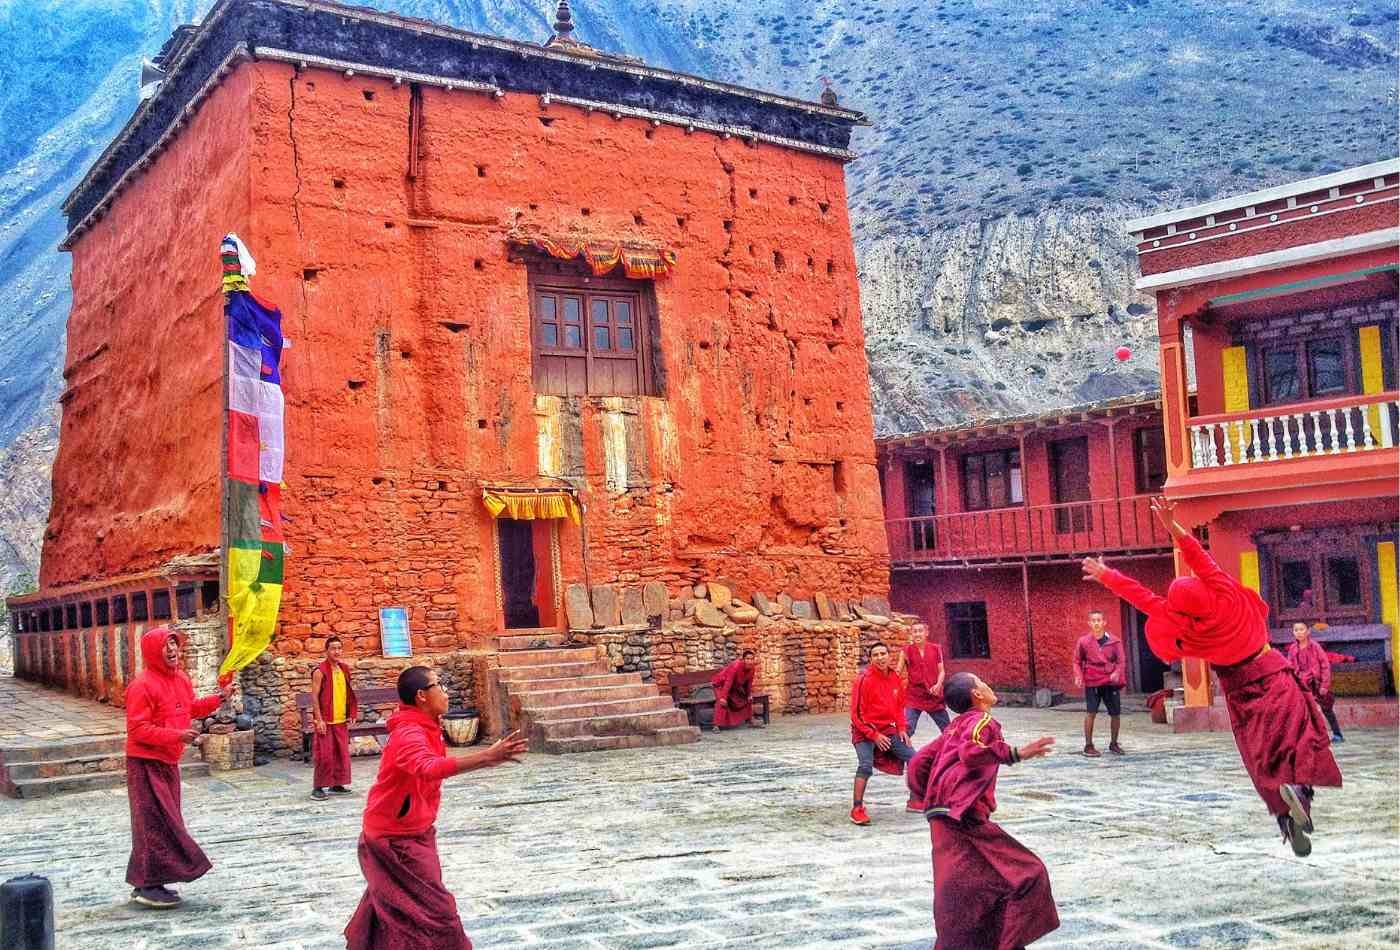 Monks playing a ball game in front of a red-walled monastery in Kagbeni, Nepal.